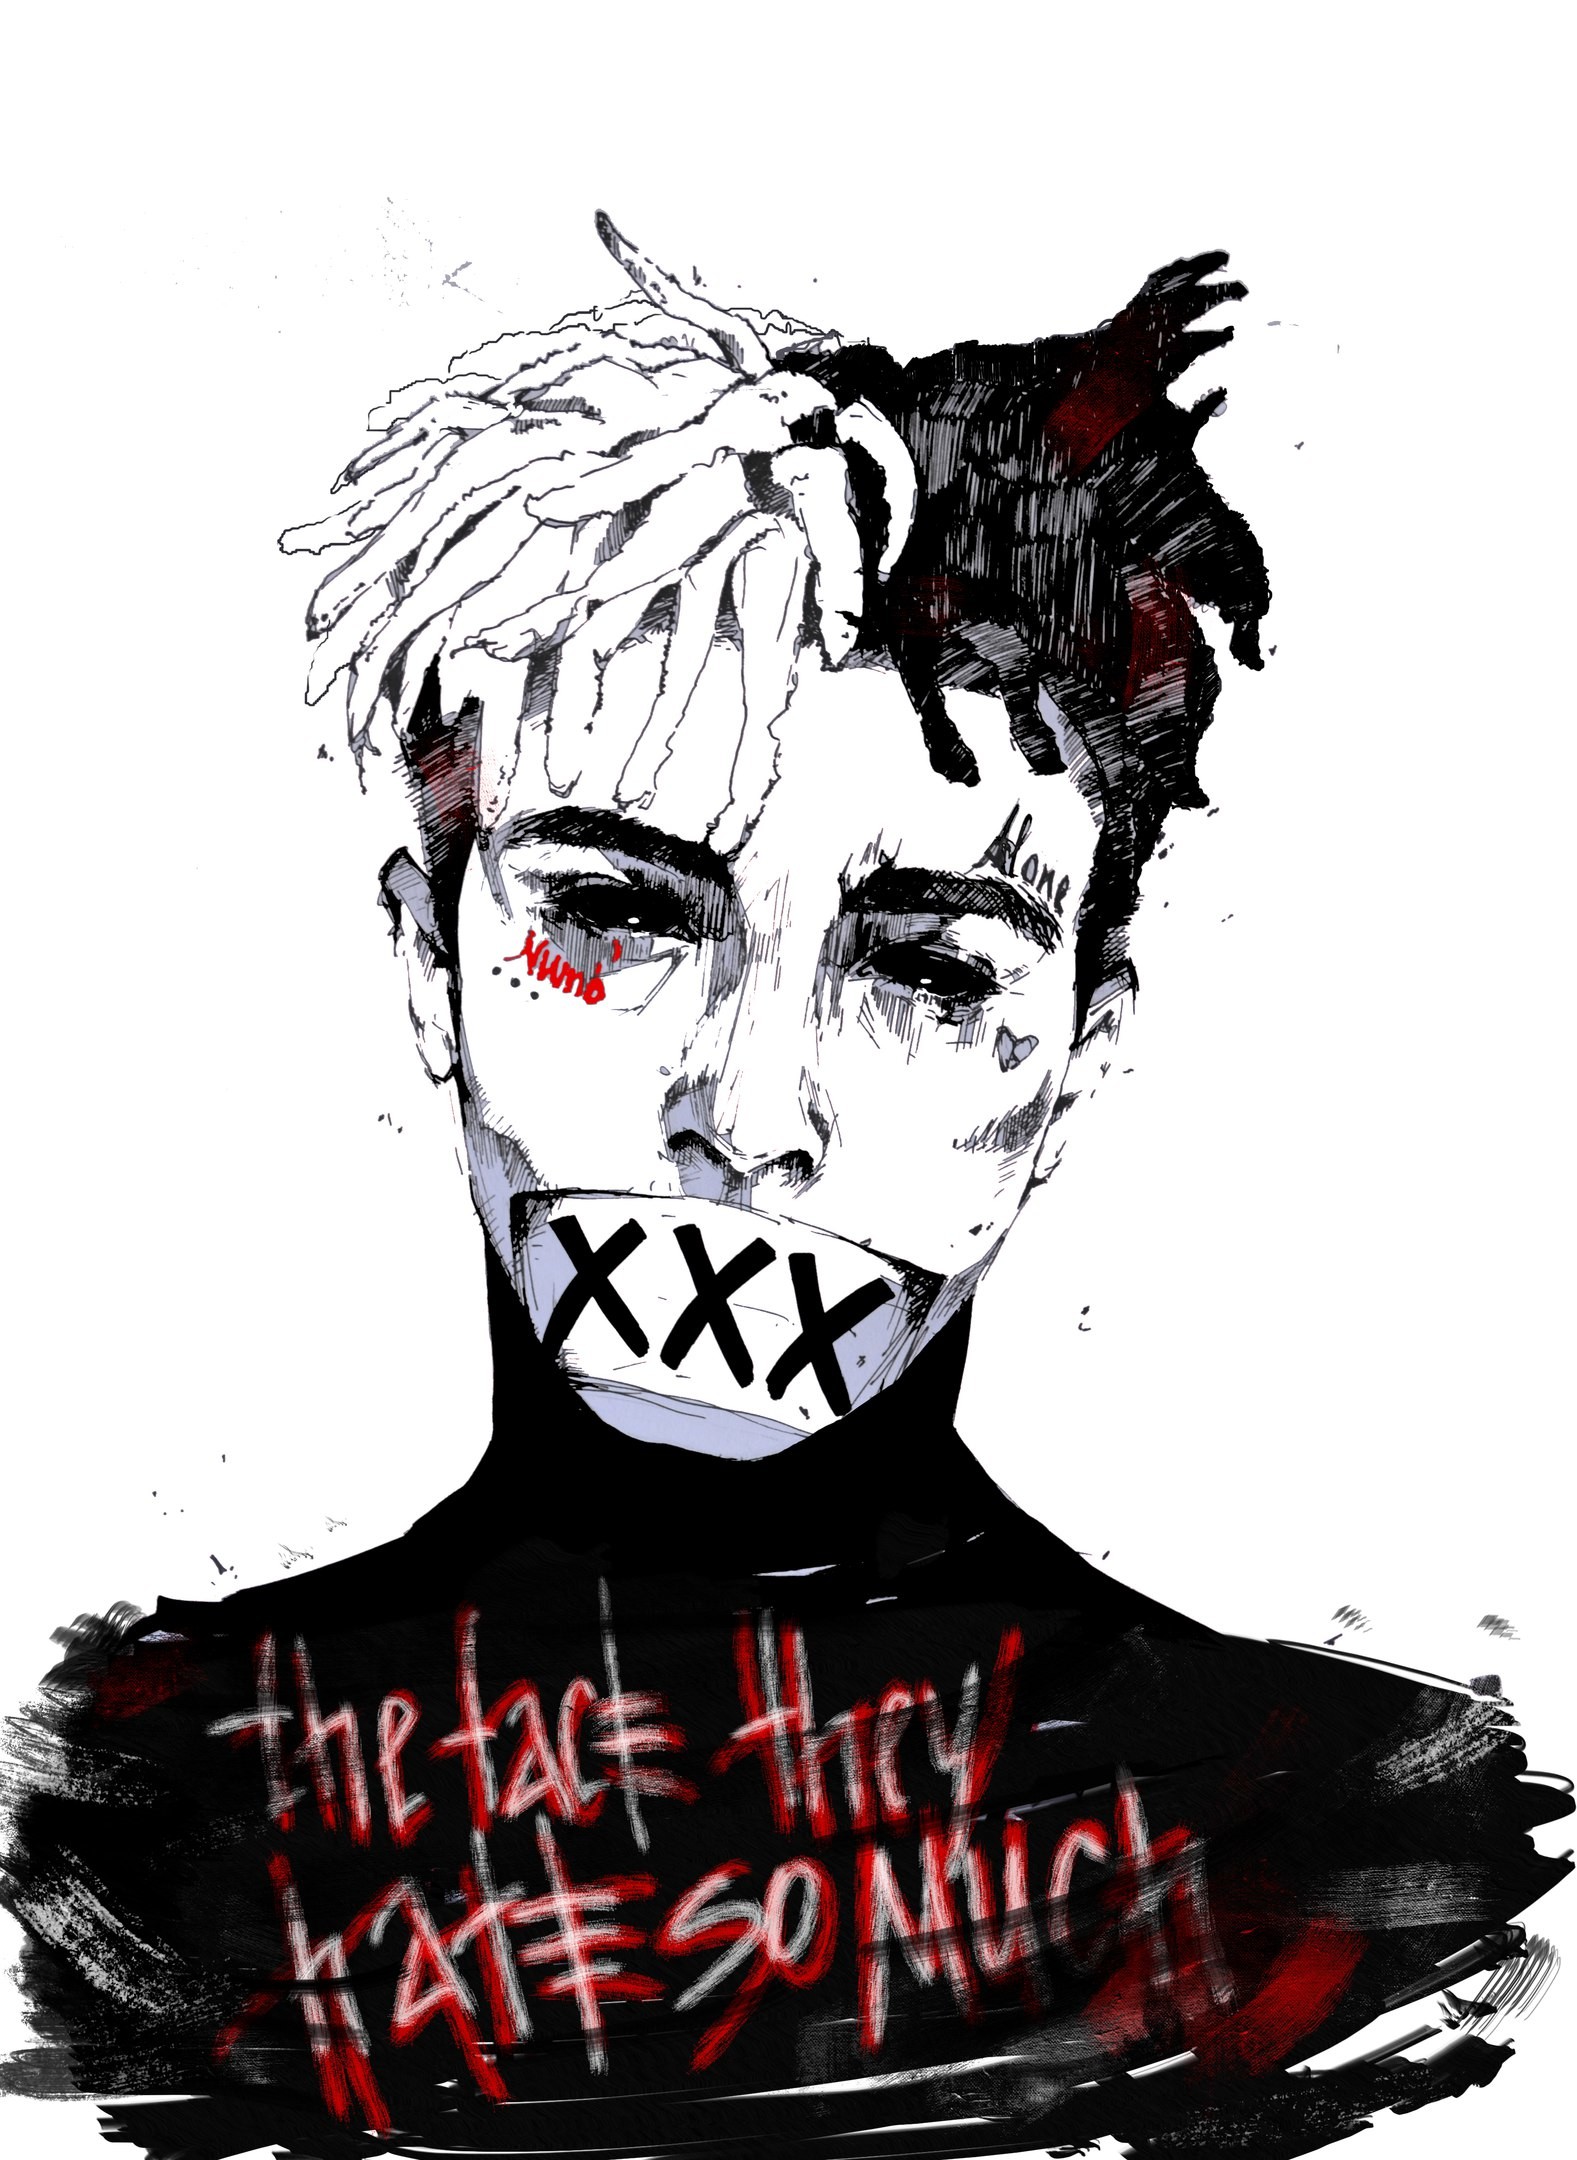 1577x2160 #XXXTENTACION #Arts this have own style, sharp but cool